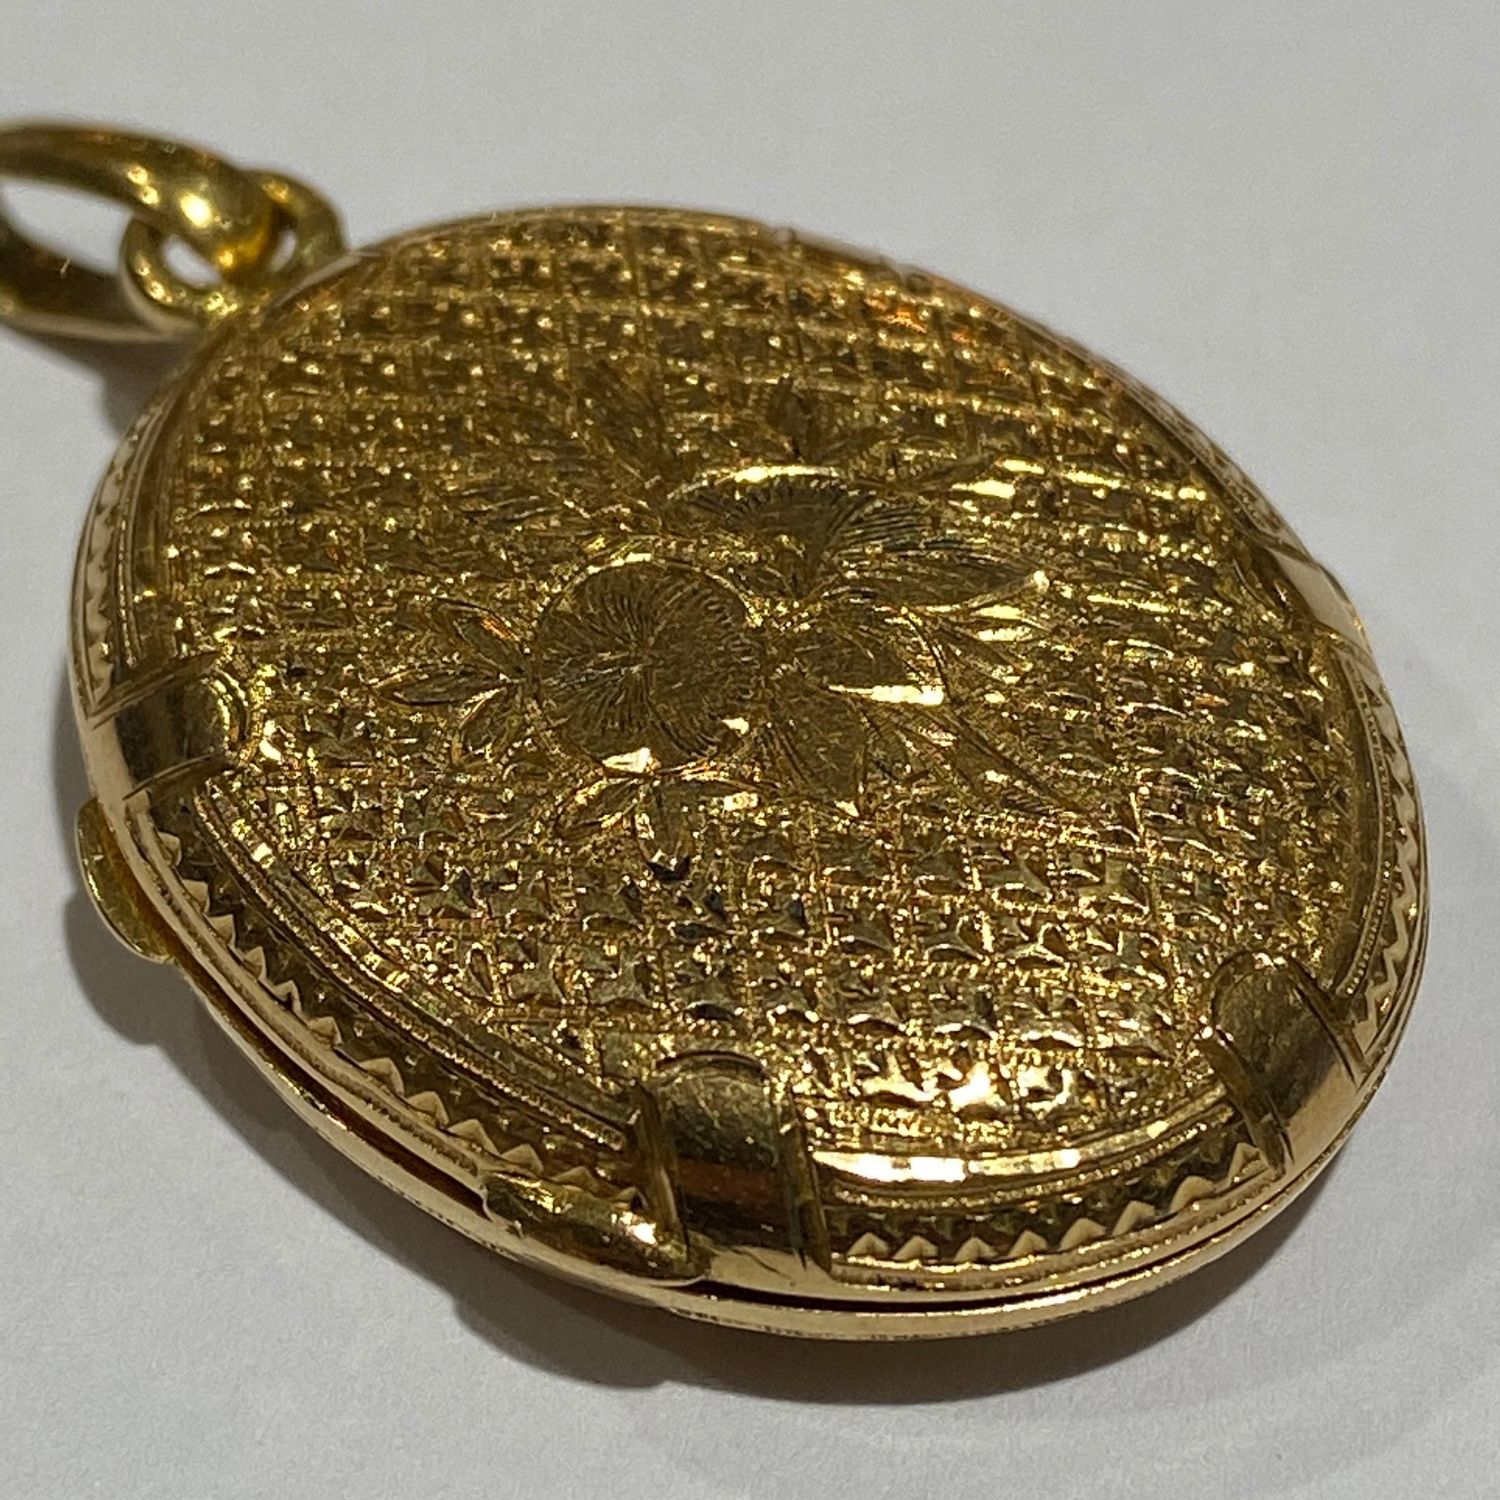 Antique 15ct Gold Locket - Jewellery & Gold - Hemswell Antique Centres